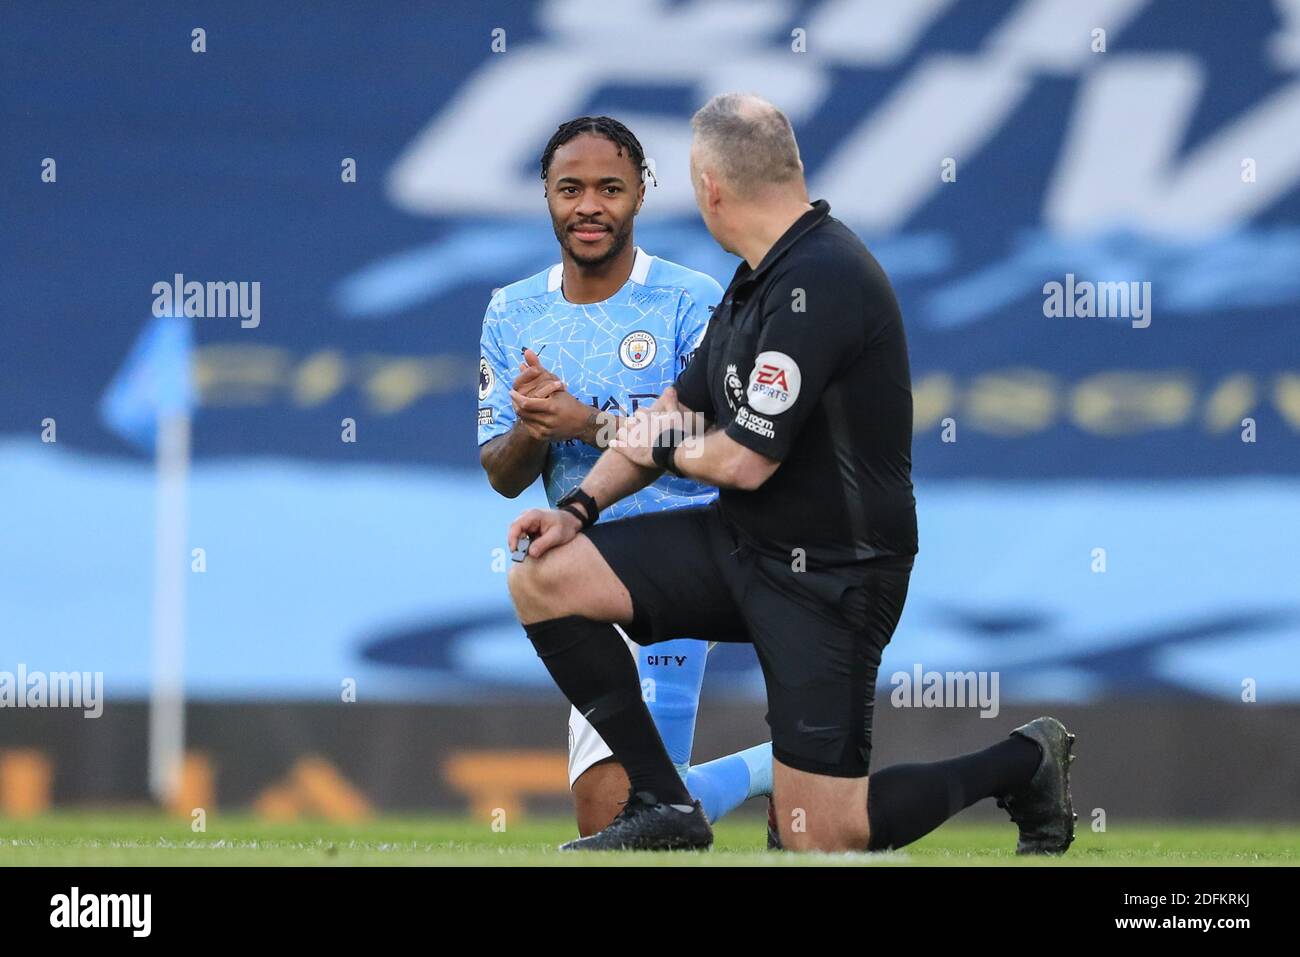 Manchester, Regno Unito. 05 dicembre 2020. Raheem Sterling n. 7 di Manchester City e arbitro Jonathan Moss Take the Knee Credit: News Images /Alamy Live News Credit: News Images /Alamy Live News Foto Stock